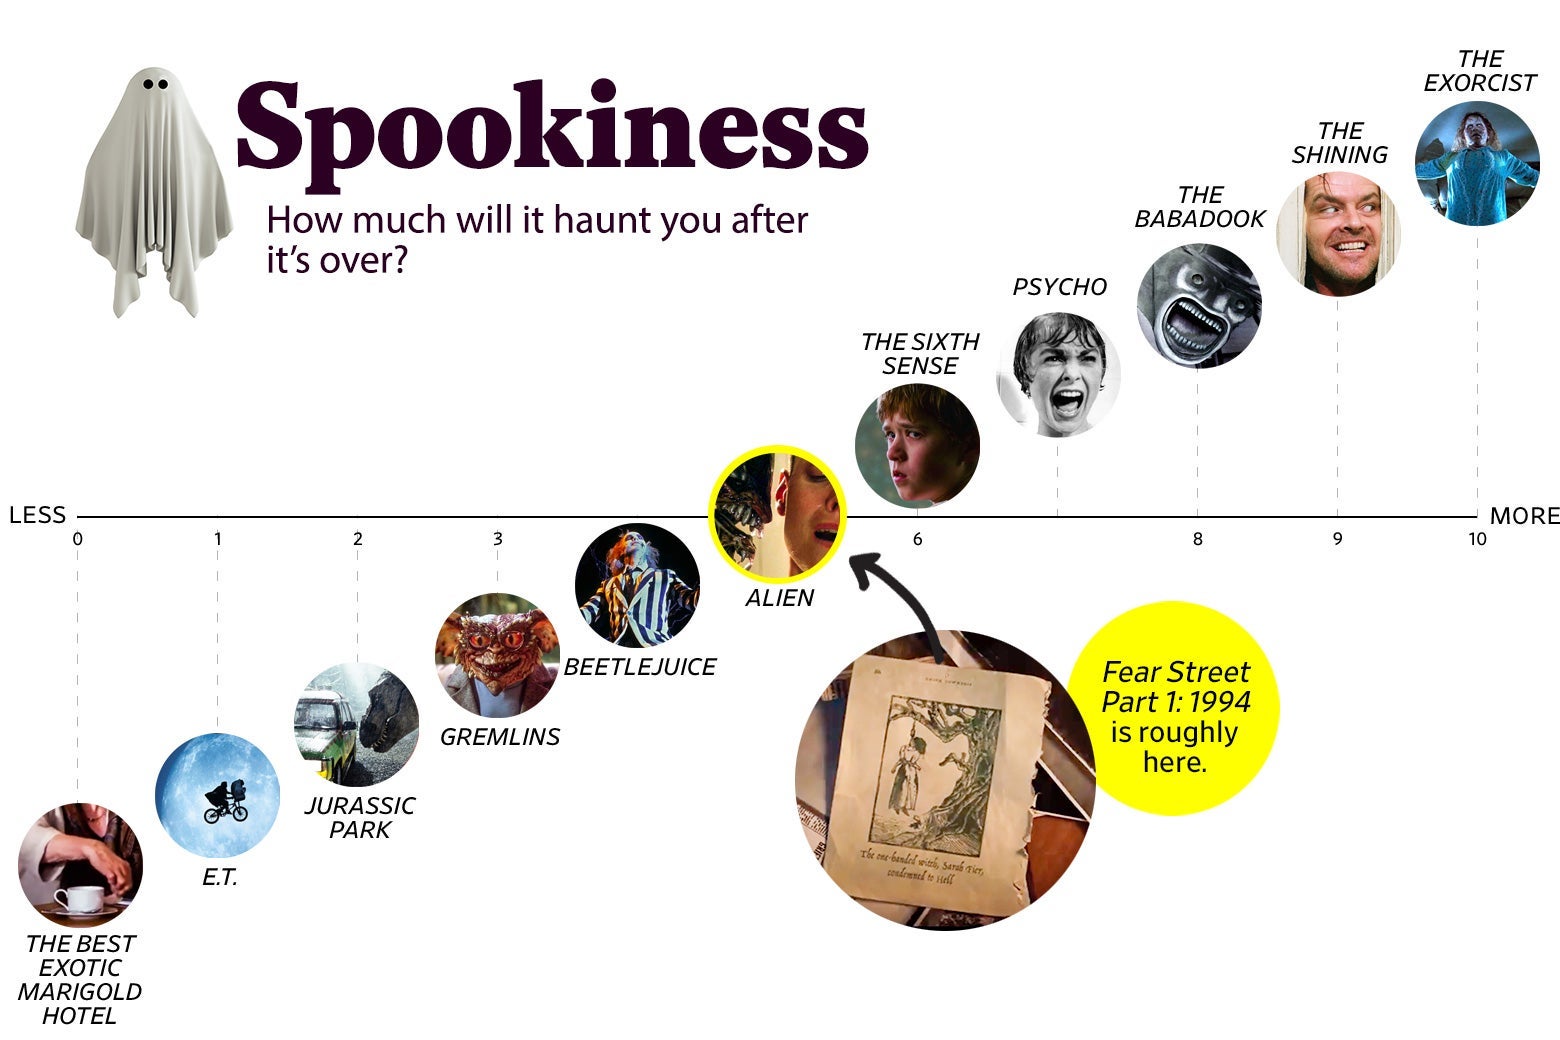 A chart titled “Spookiness: How much will it haunt you after the movie is over?” shows that Fear Street ranks a 5 in spookiness, roughly the same as Alien. The scale ranges from The Best Exotic Marigold Hotel (0) to The Exorcist (10). 